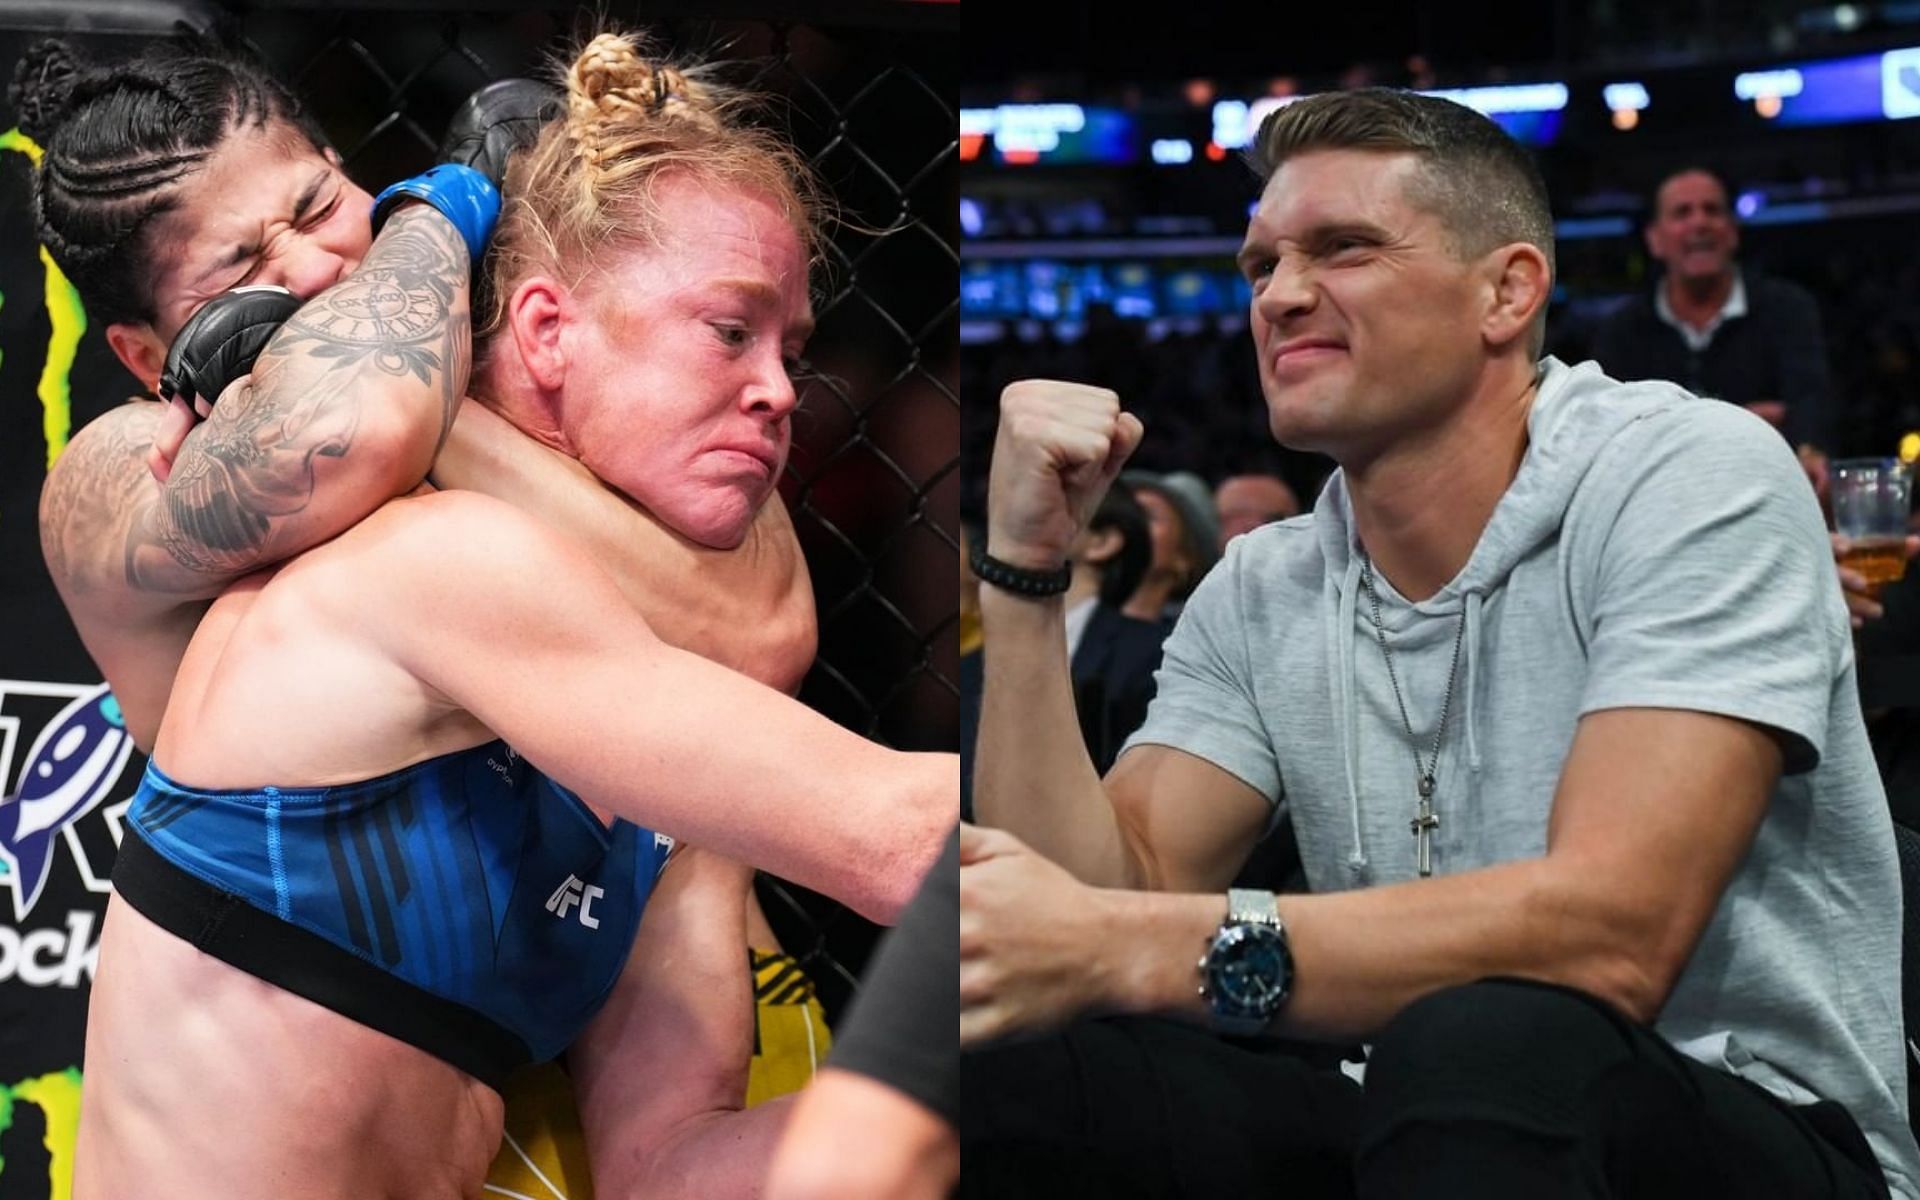 Holly Holm vs. Ketlen Vieira (left), and Stephen Thompson (right) (Images courtesy of @ufc Instagram and @wonderboymma Instagram)